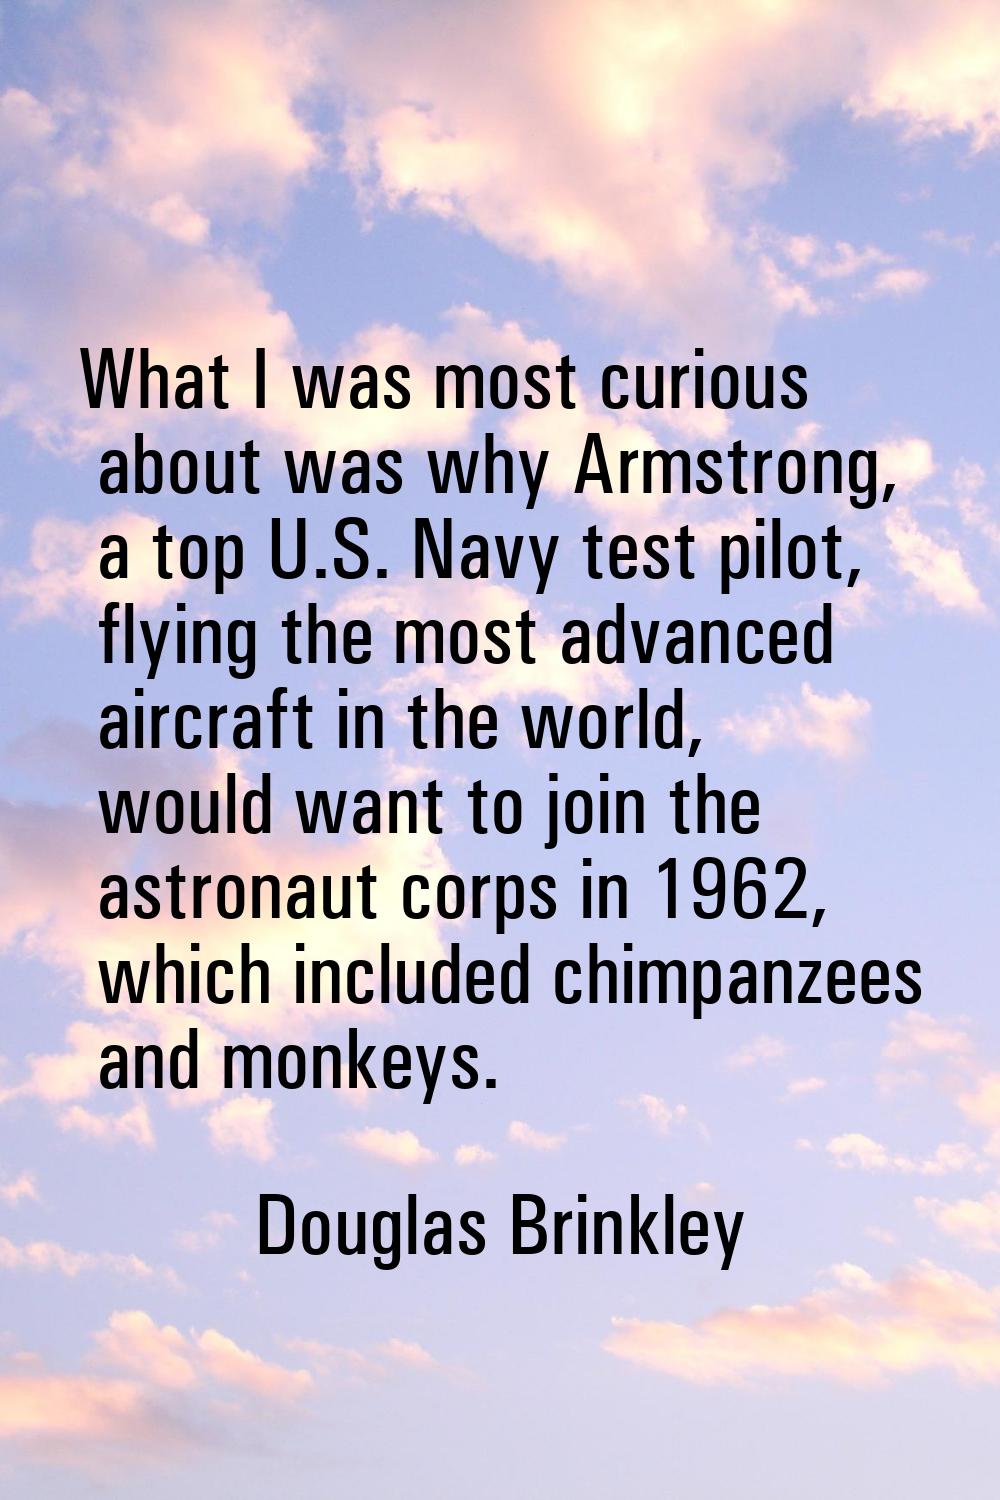 What I was most curious about was why Armstrong, a top U.S. Navy test pilot, flying the most advanc